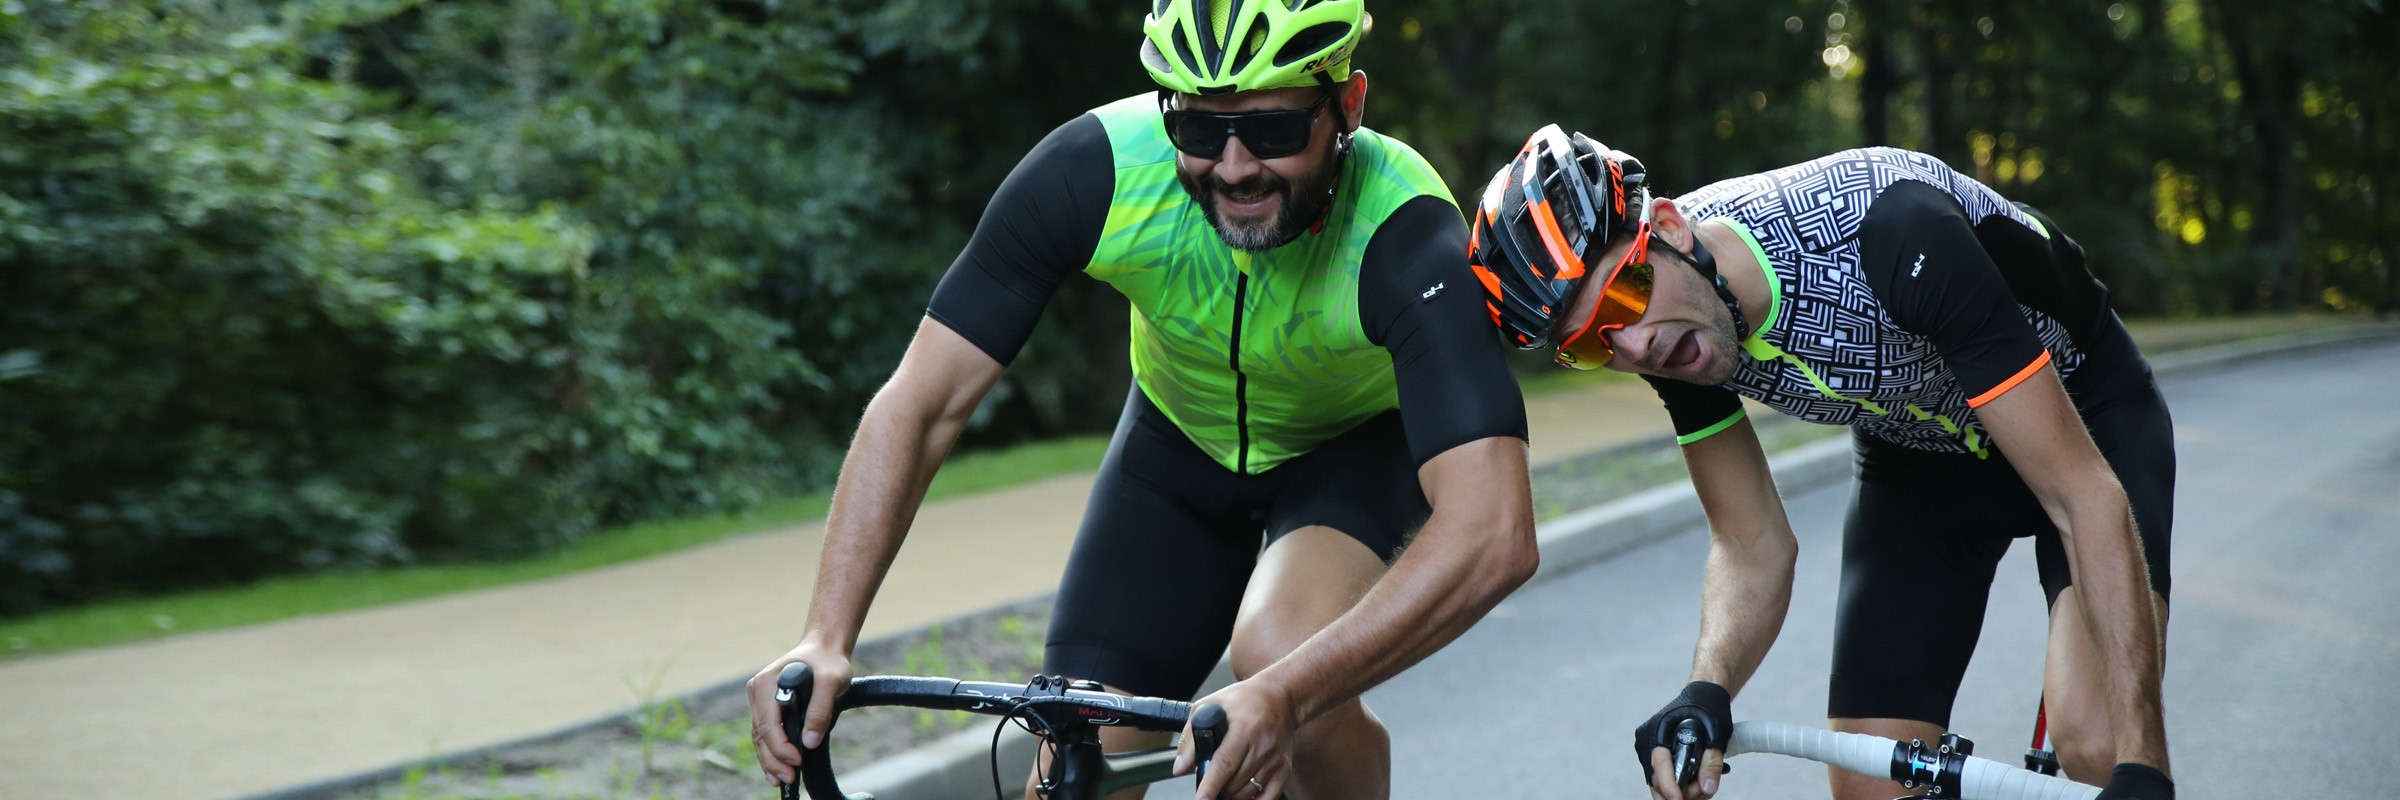 Professional cycling apparel for men